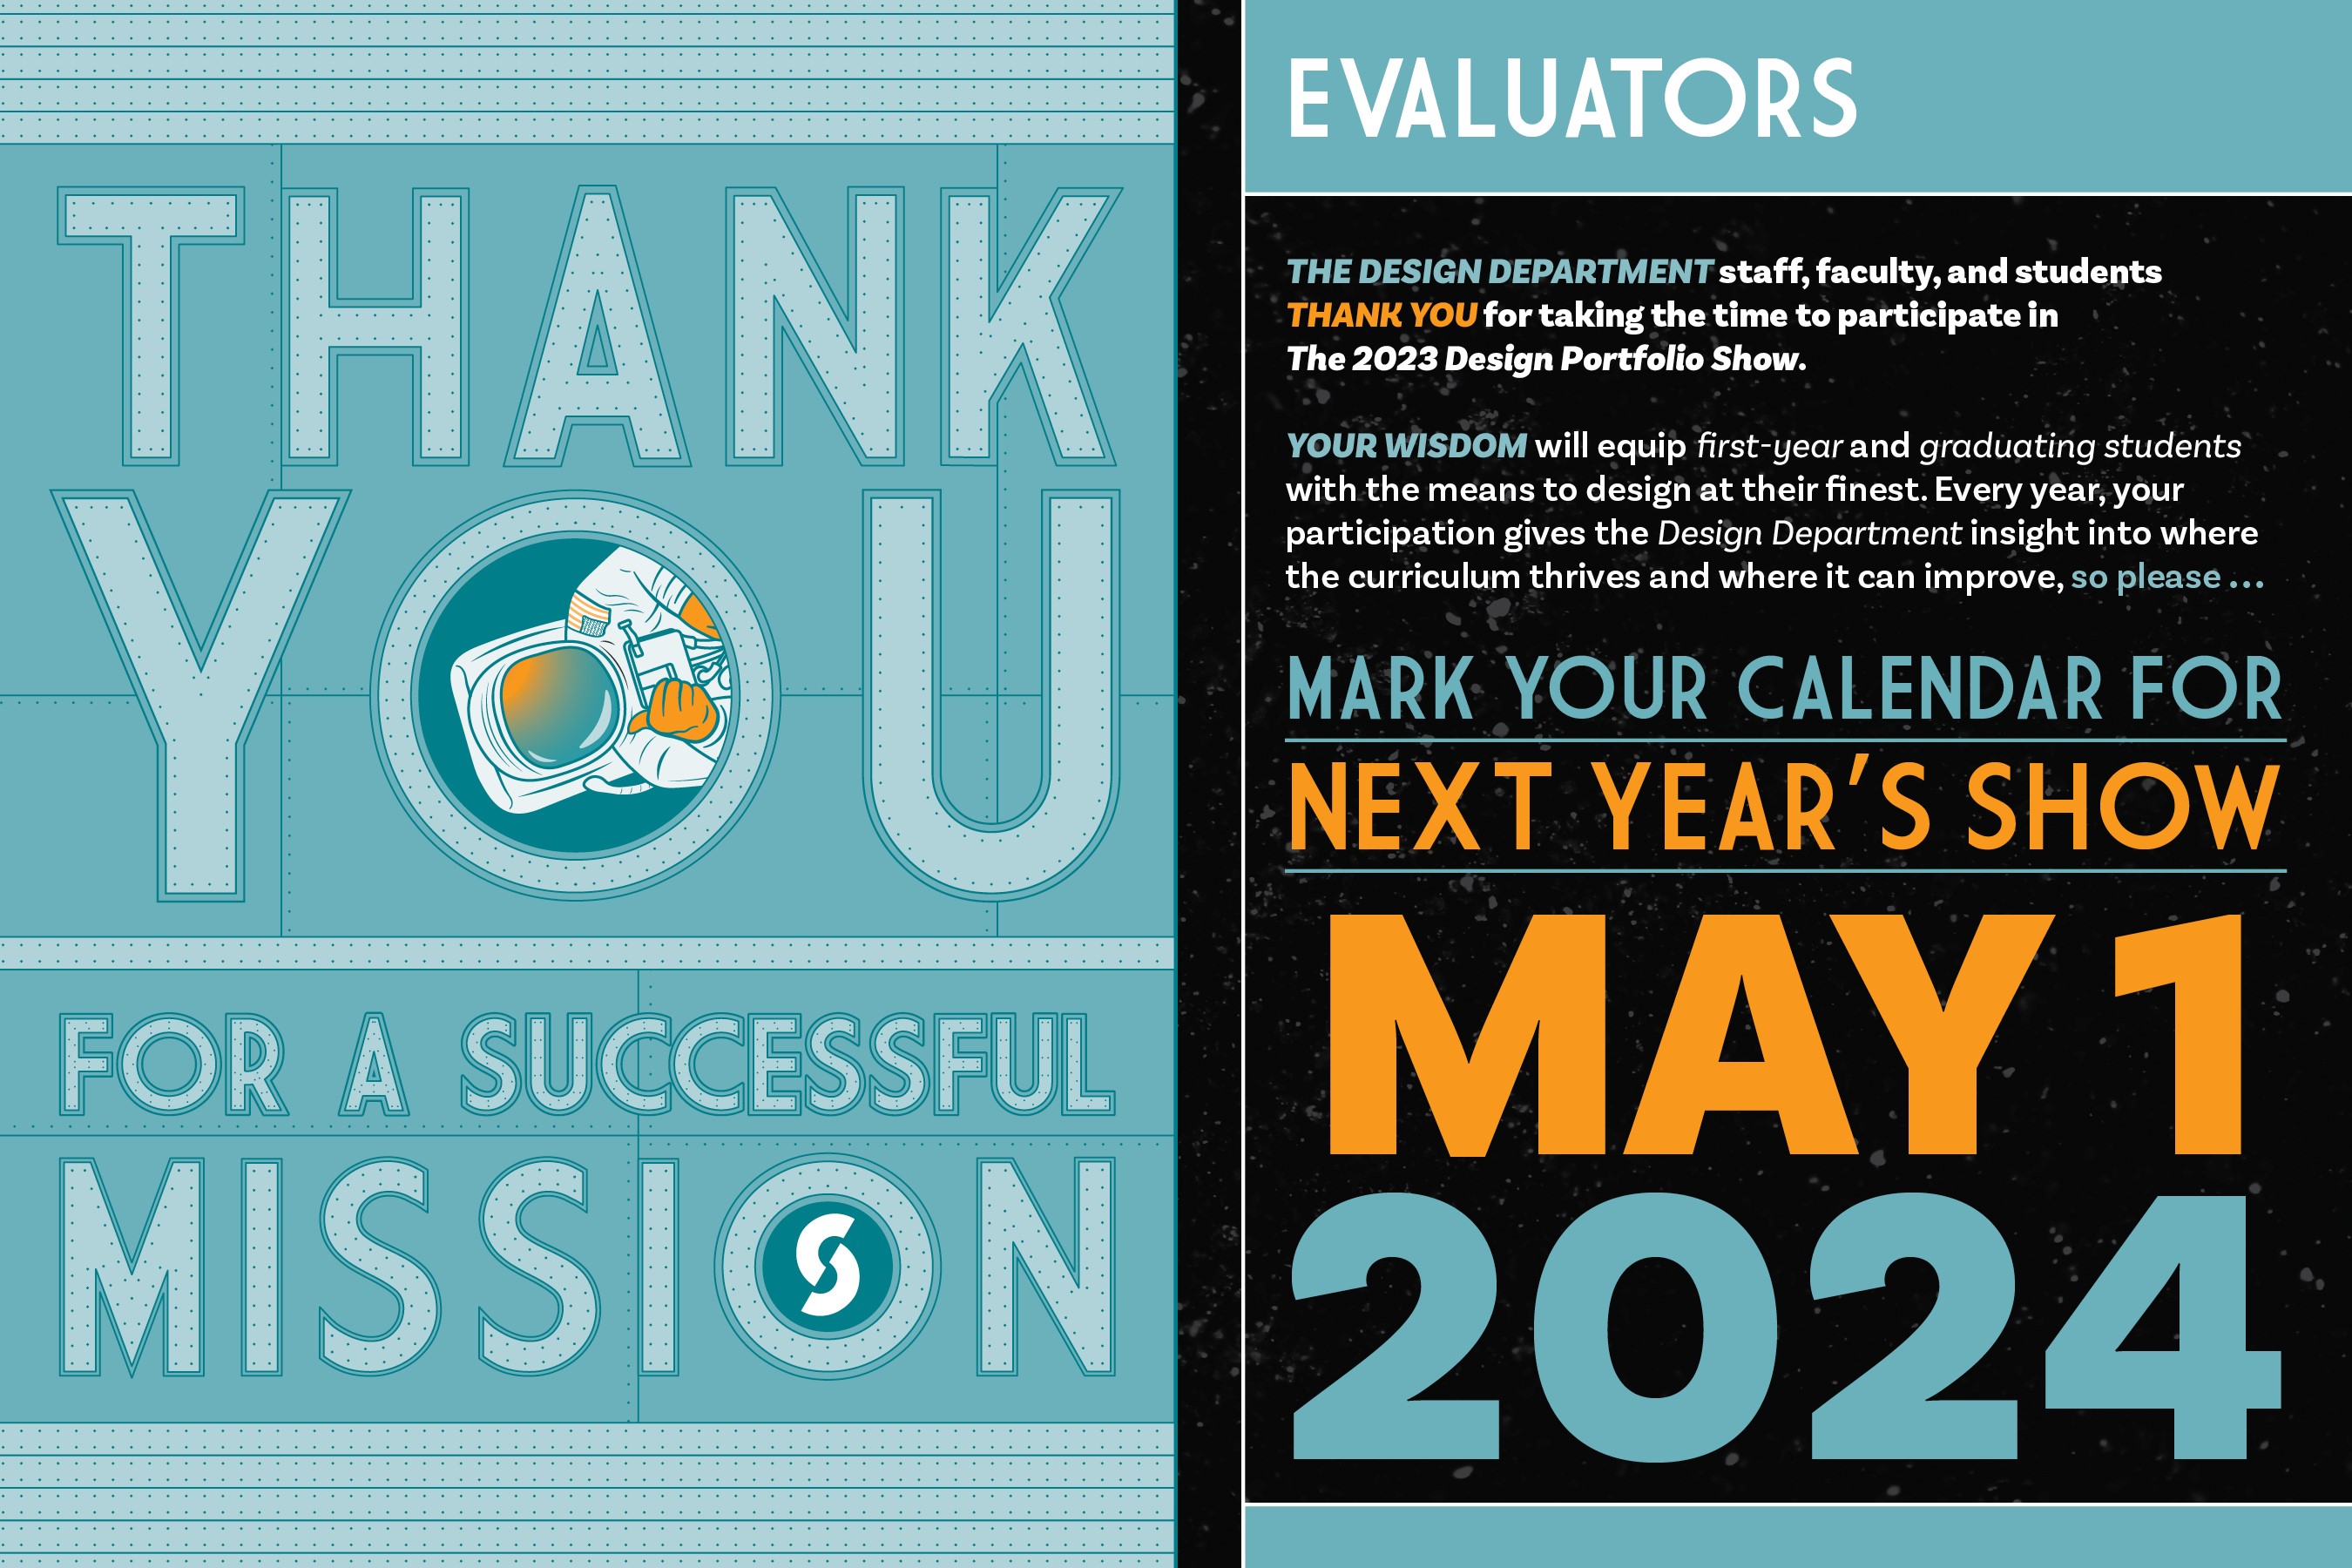 Thank you for a successful Mission. Evaluators  The Design Department staff, faculty and students THANK YOU for taking the time to participate in The 2023 Design Portfolio Show.   Your Wisdom with equip first-year and graduating students with the means to design at their finest. Every year, your participation gives the Design Department insight into where the curriculum thrives and where it can improve so please… Mark your calendars for Next Year’s Show May 1, 2024